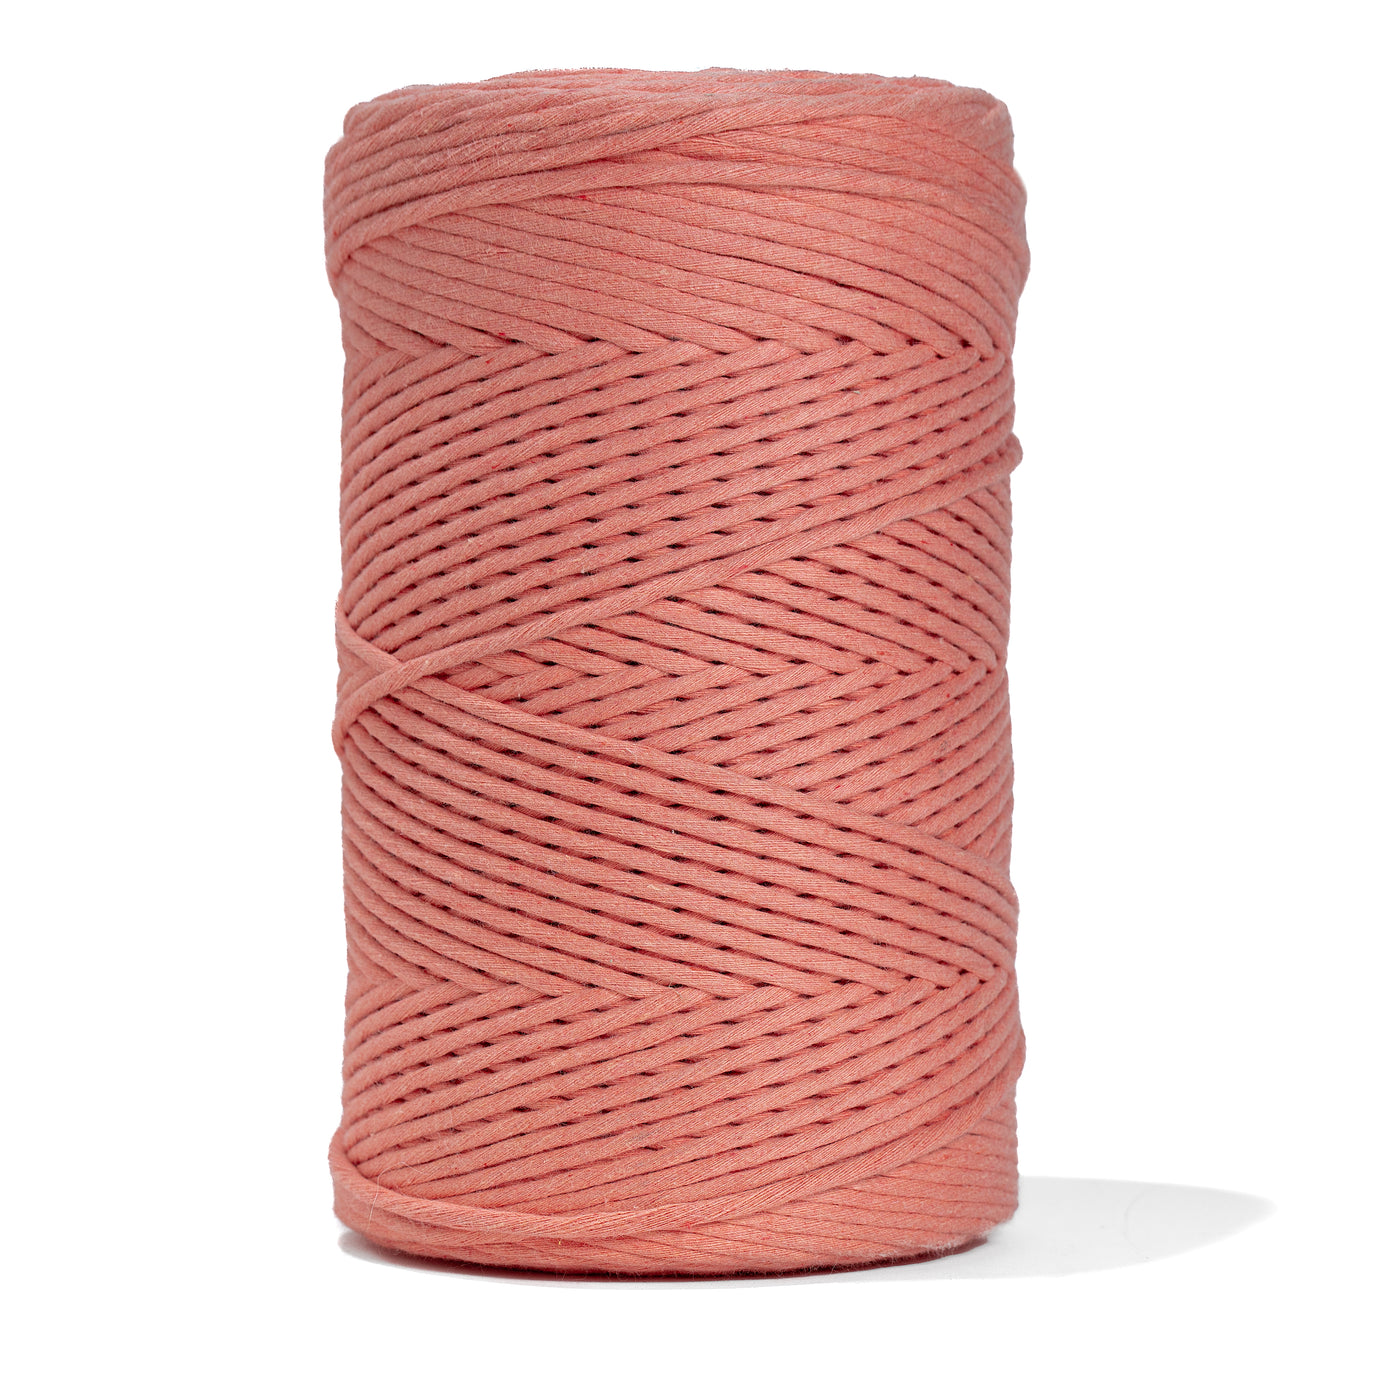 SOFT COTTON CORD ZERO WASTE 4 MM - 1 SINGLE STRAND - FRUIT PUNCH COLOR